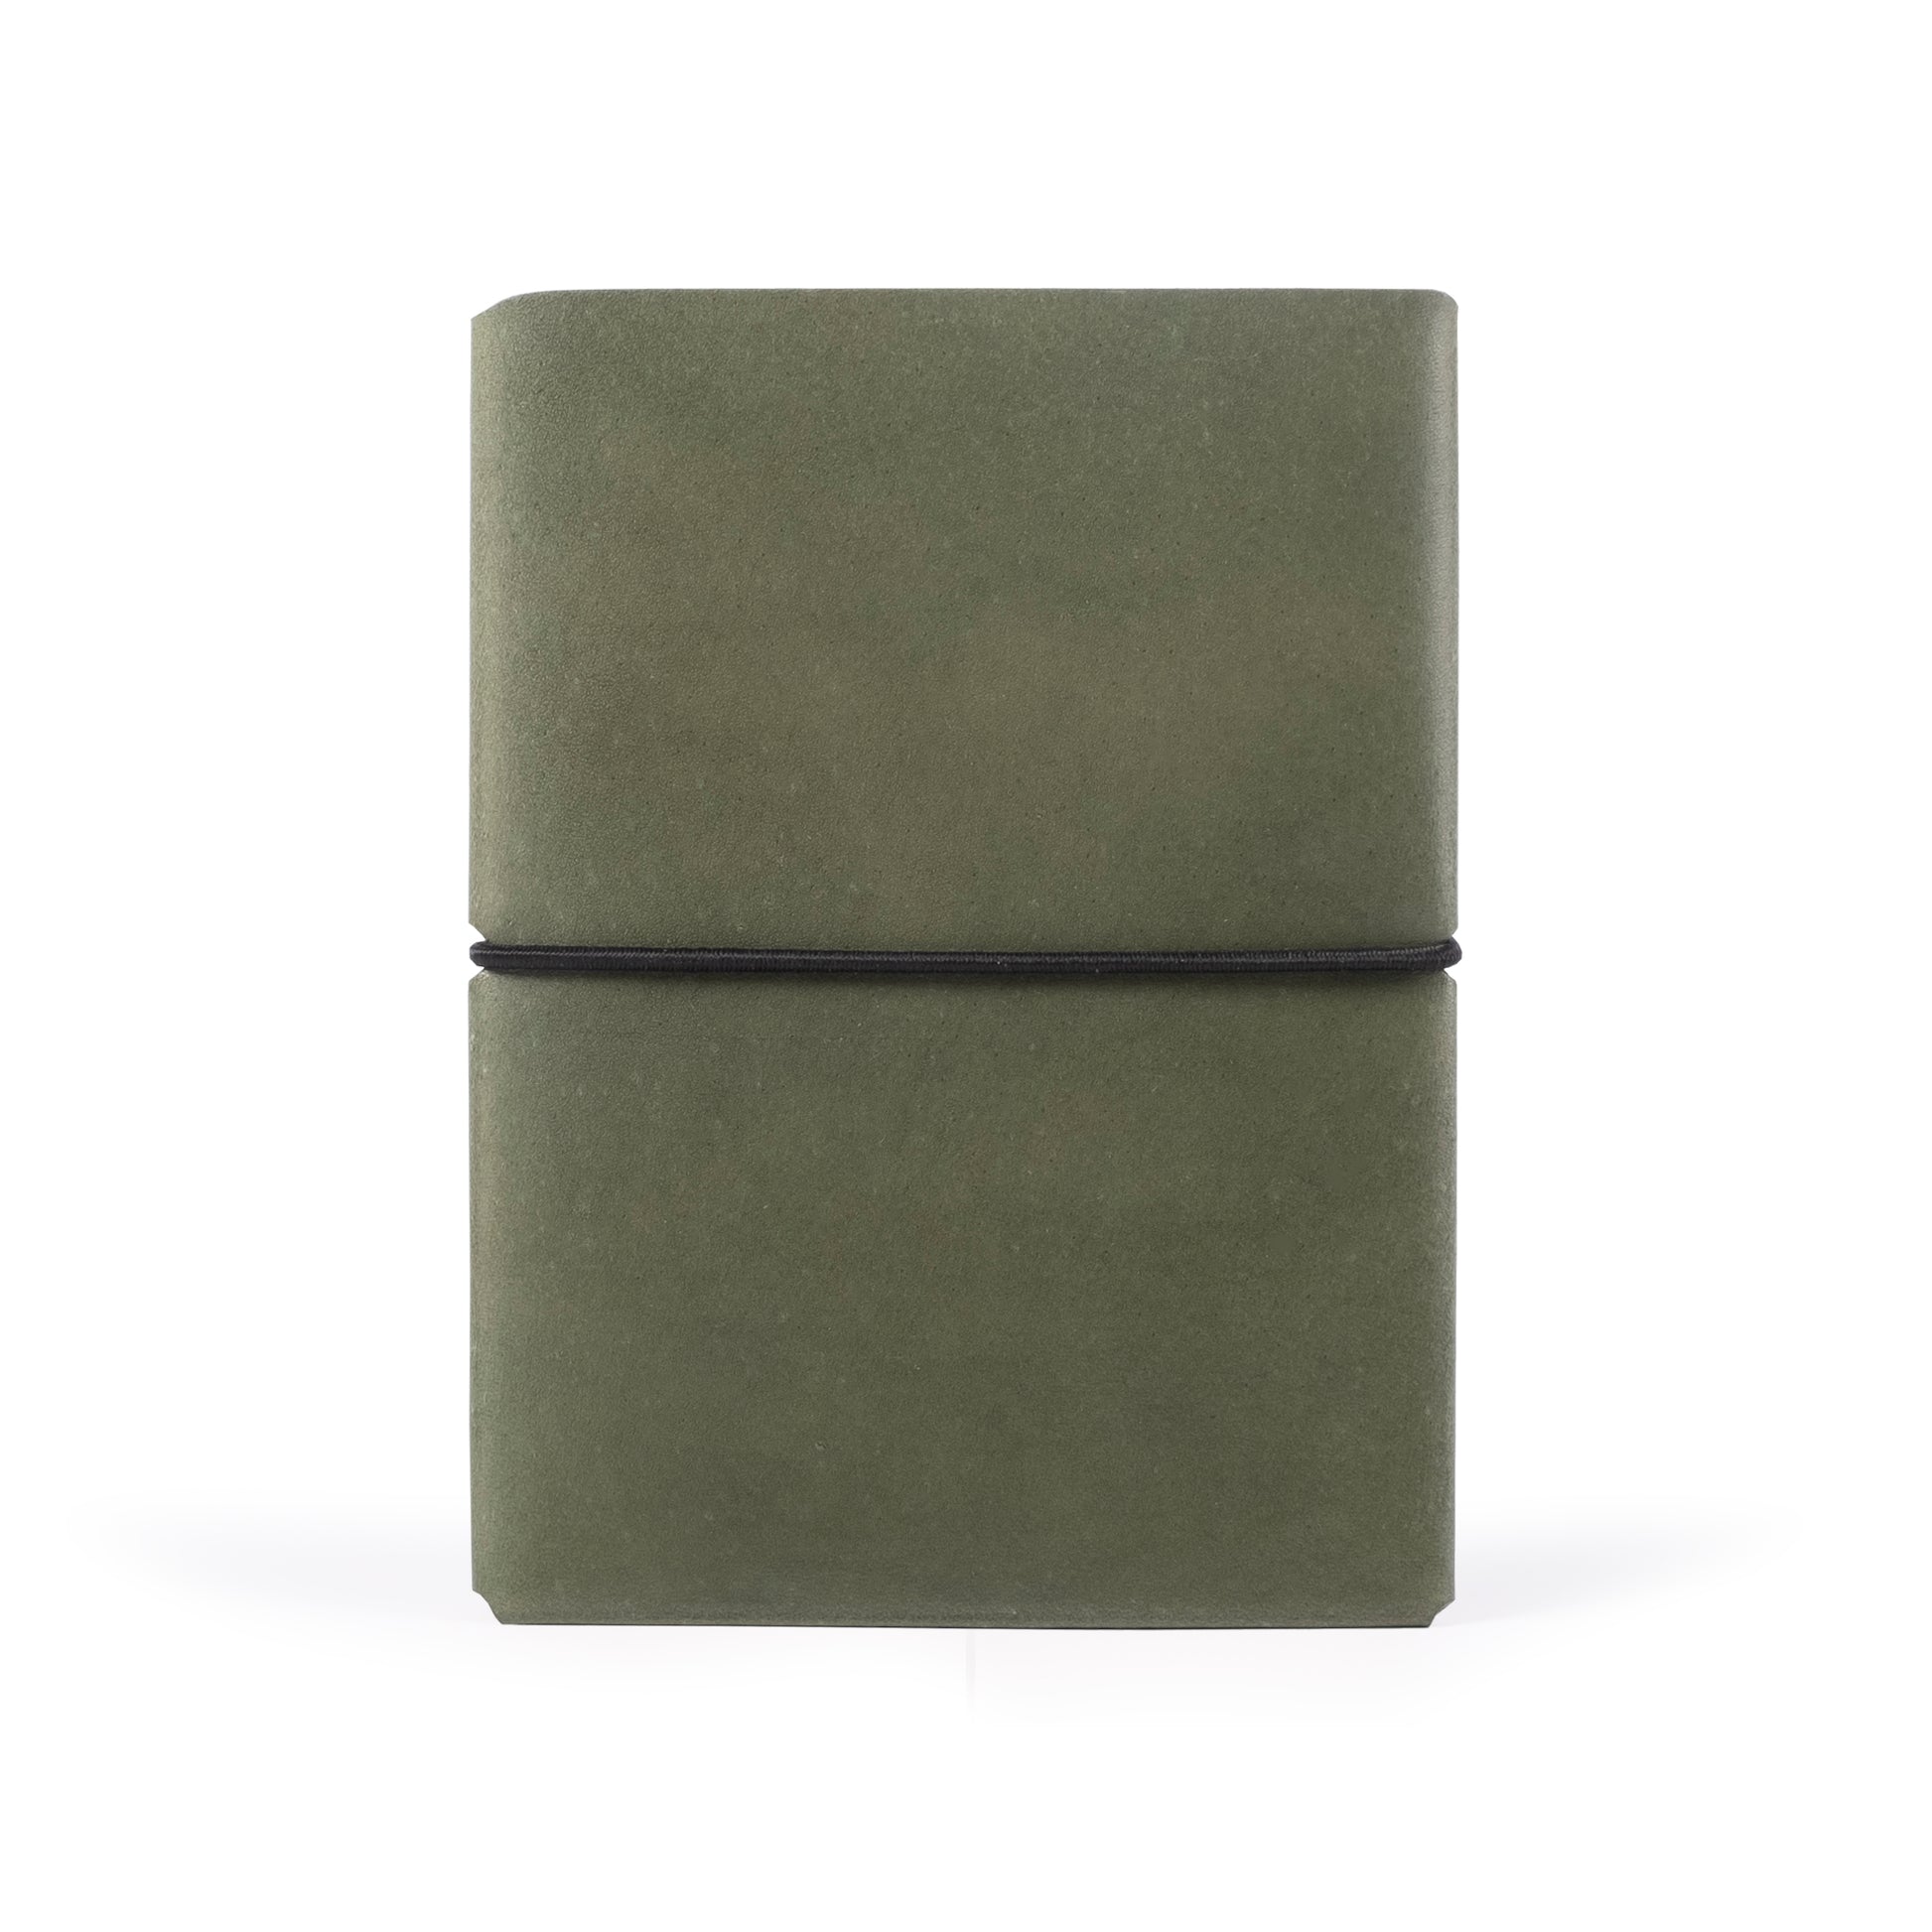 Nitmoi Passport Cover handmade from vegetable-tanned leather